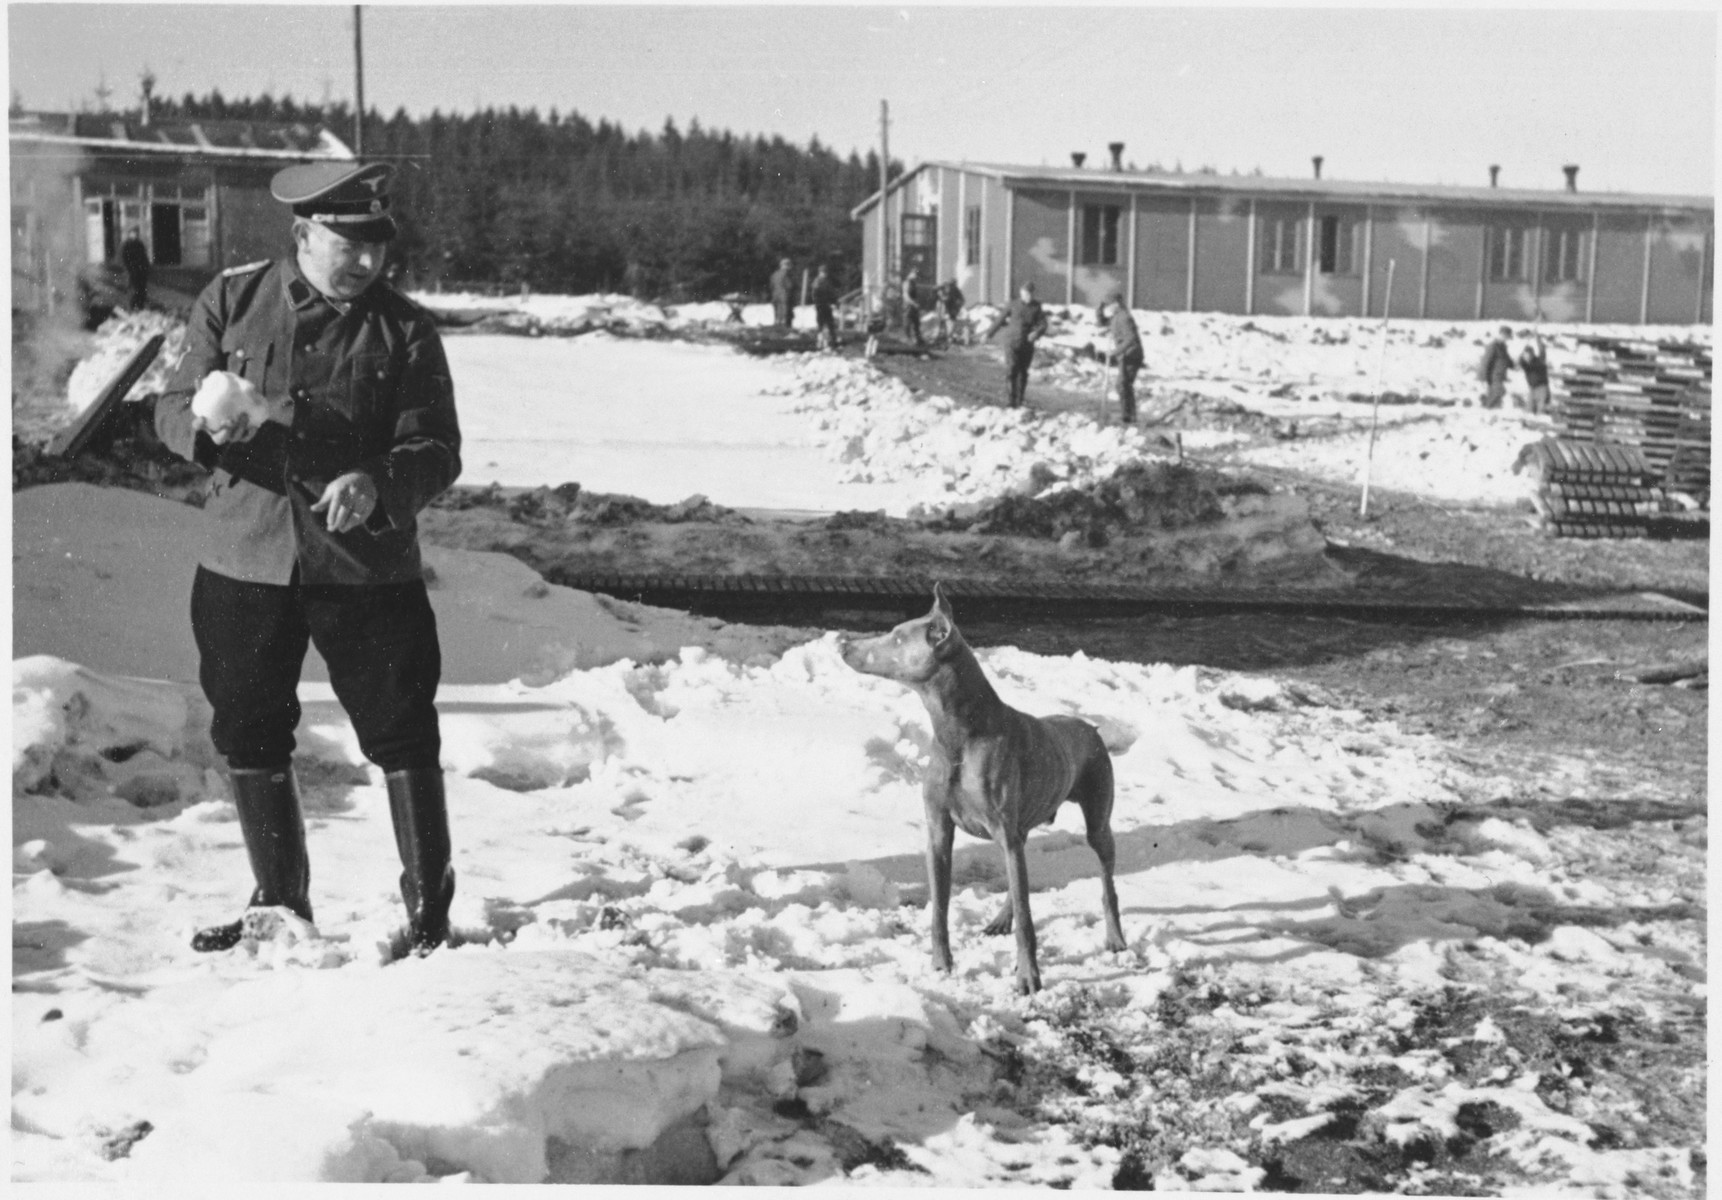 A Nazi official plays with his dog in the snow at Hinzert (sub-camp of Buchenwald)  while prisoners can be seen working in the background.